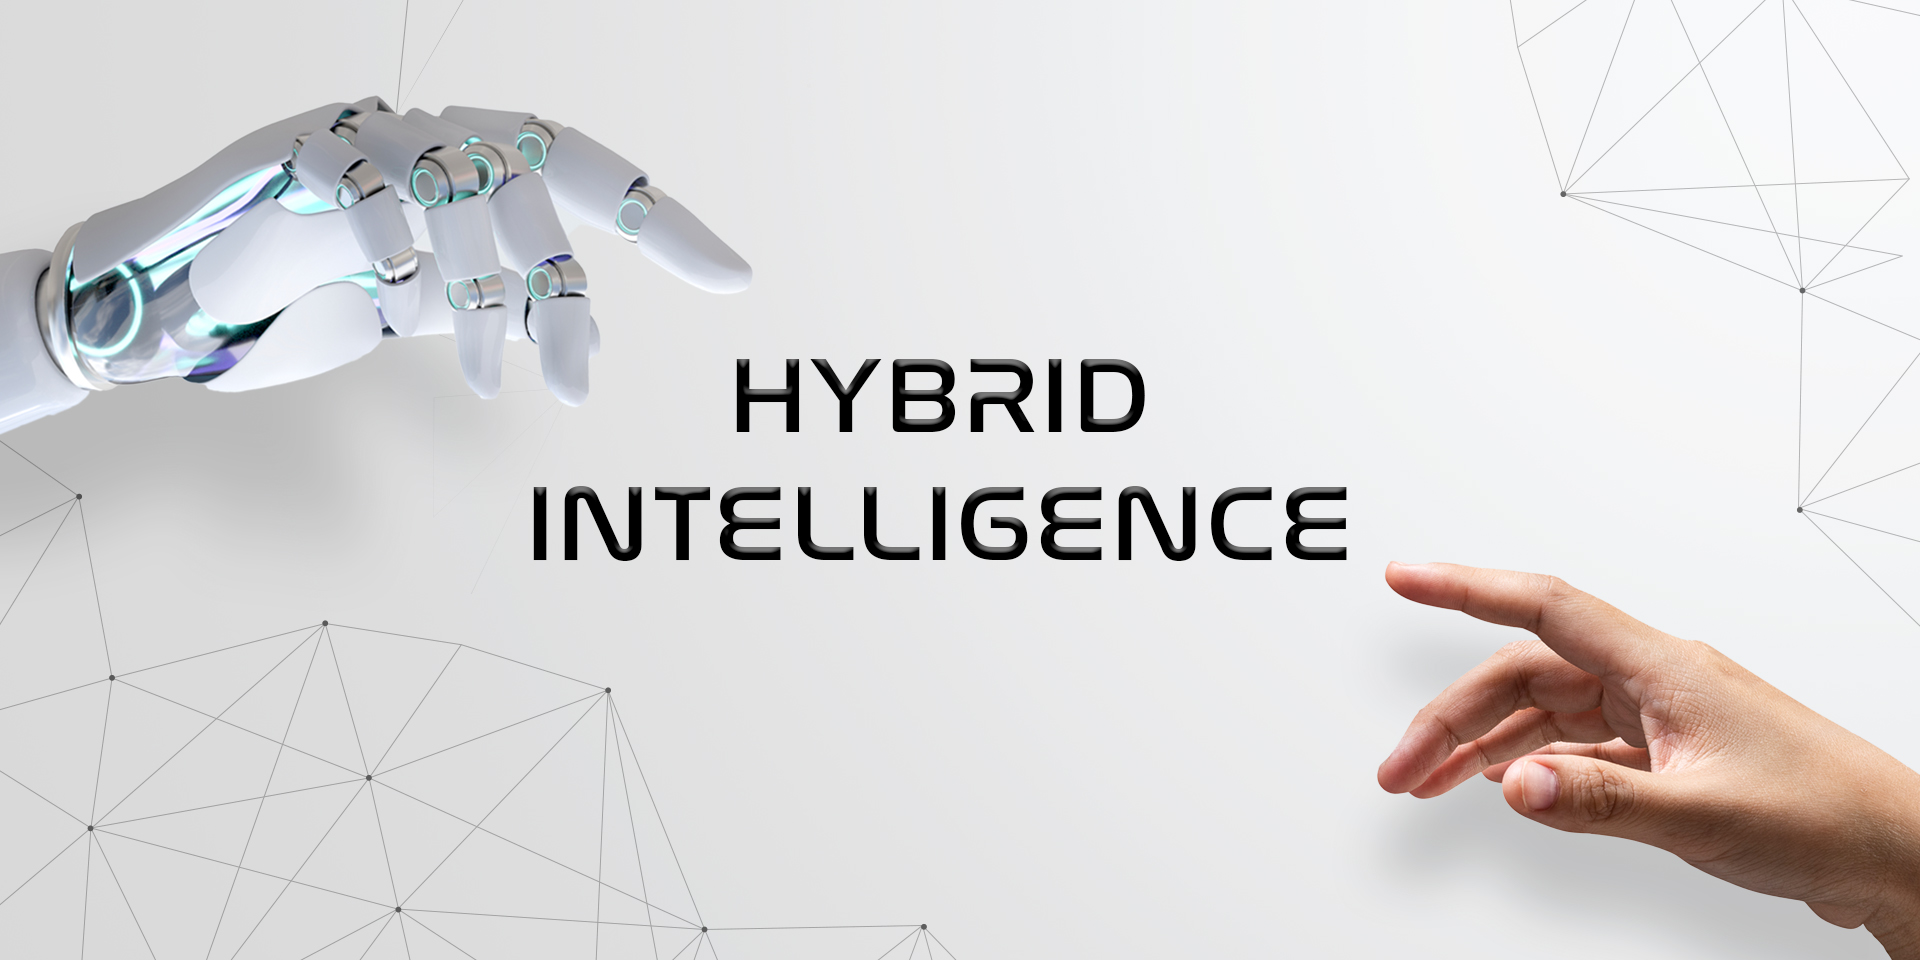 Hybrid Intelligence is Rightly Said to Be the Future of AI